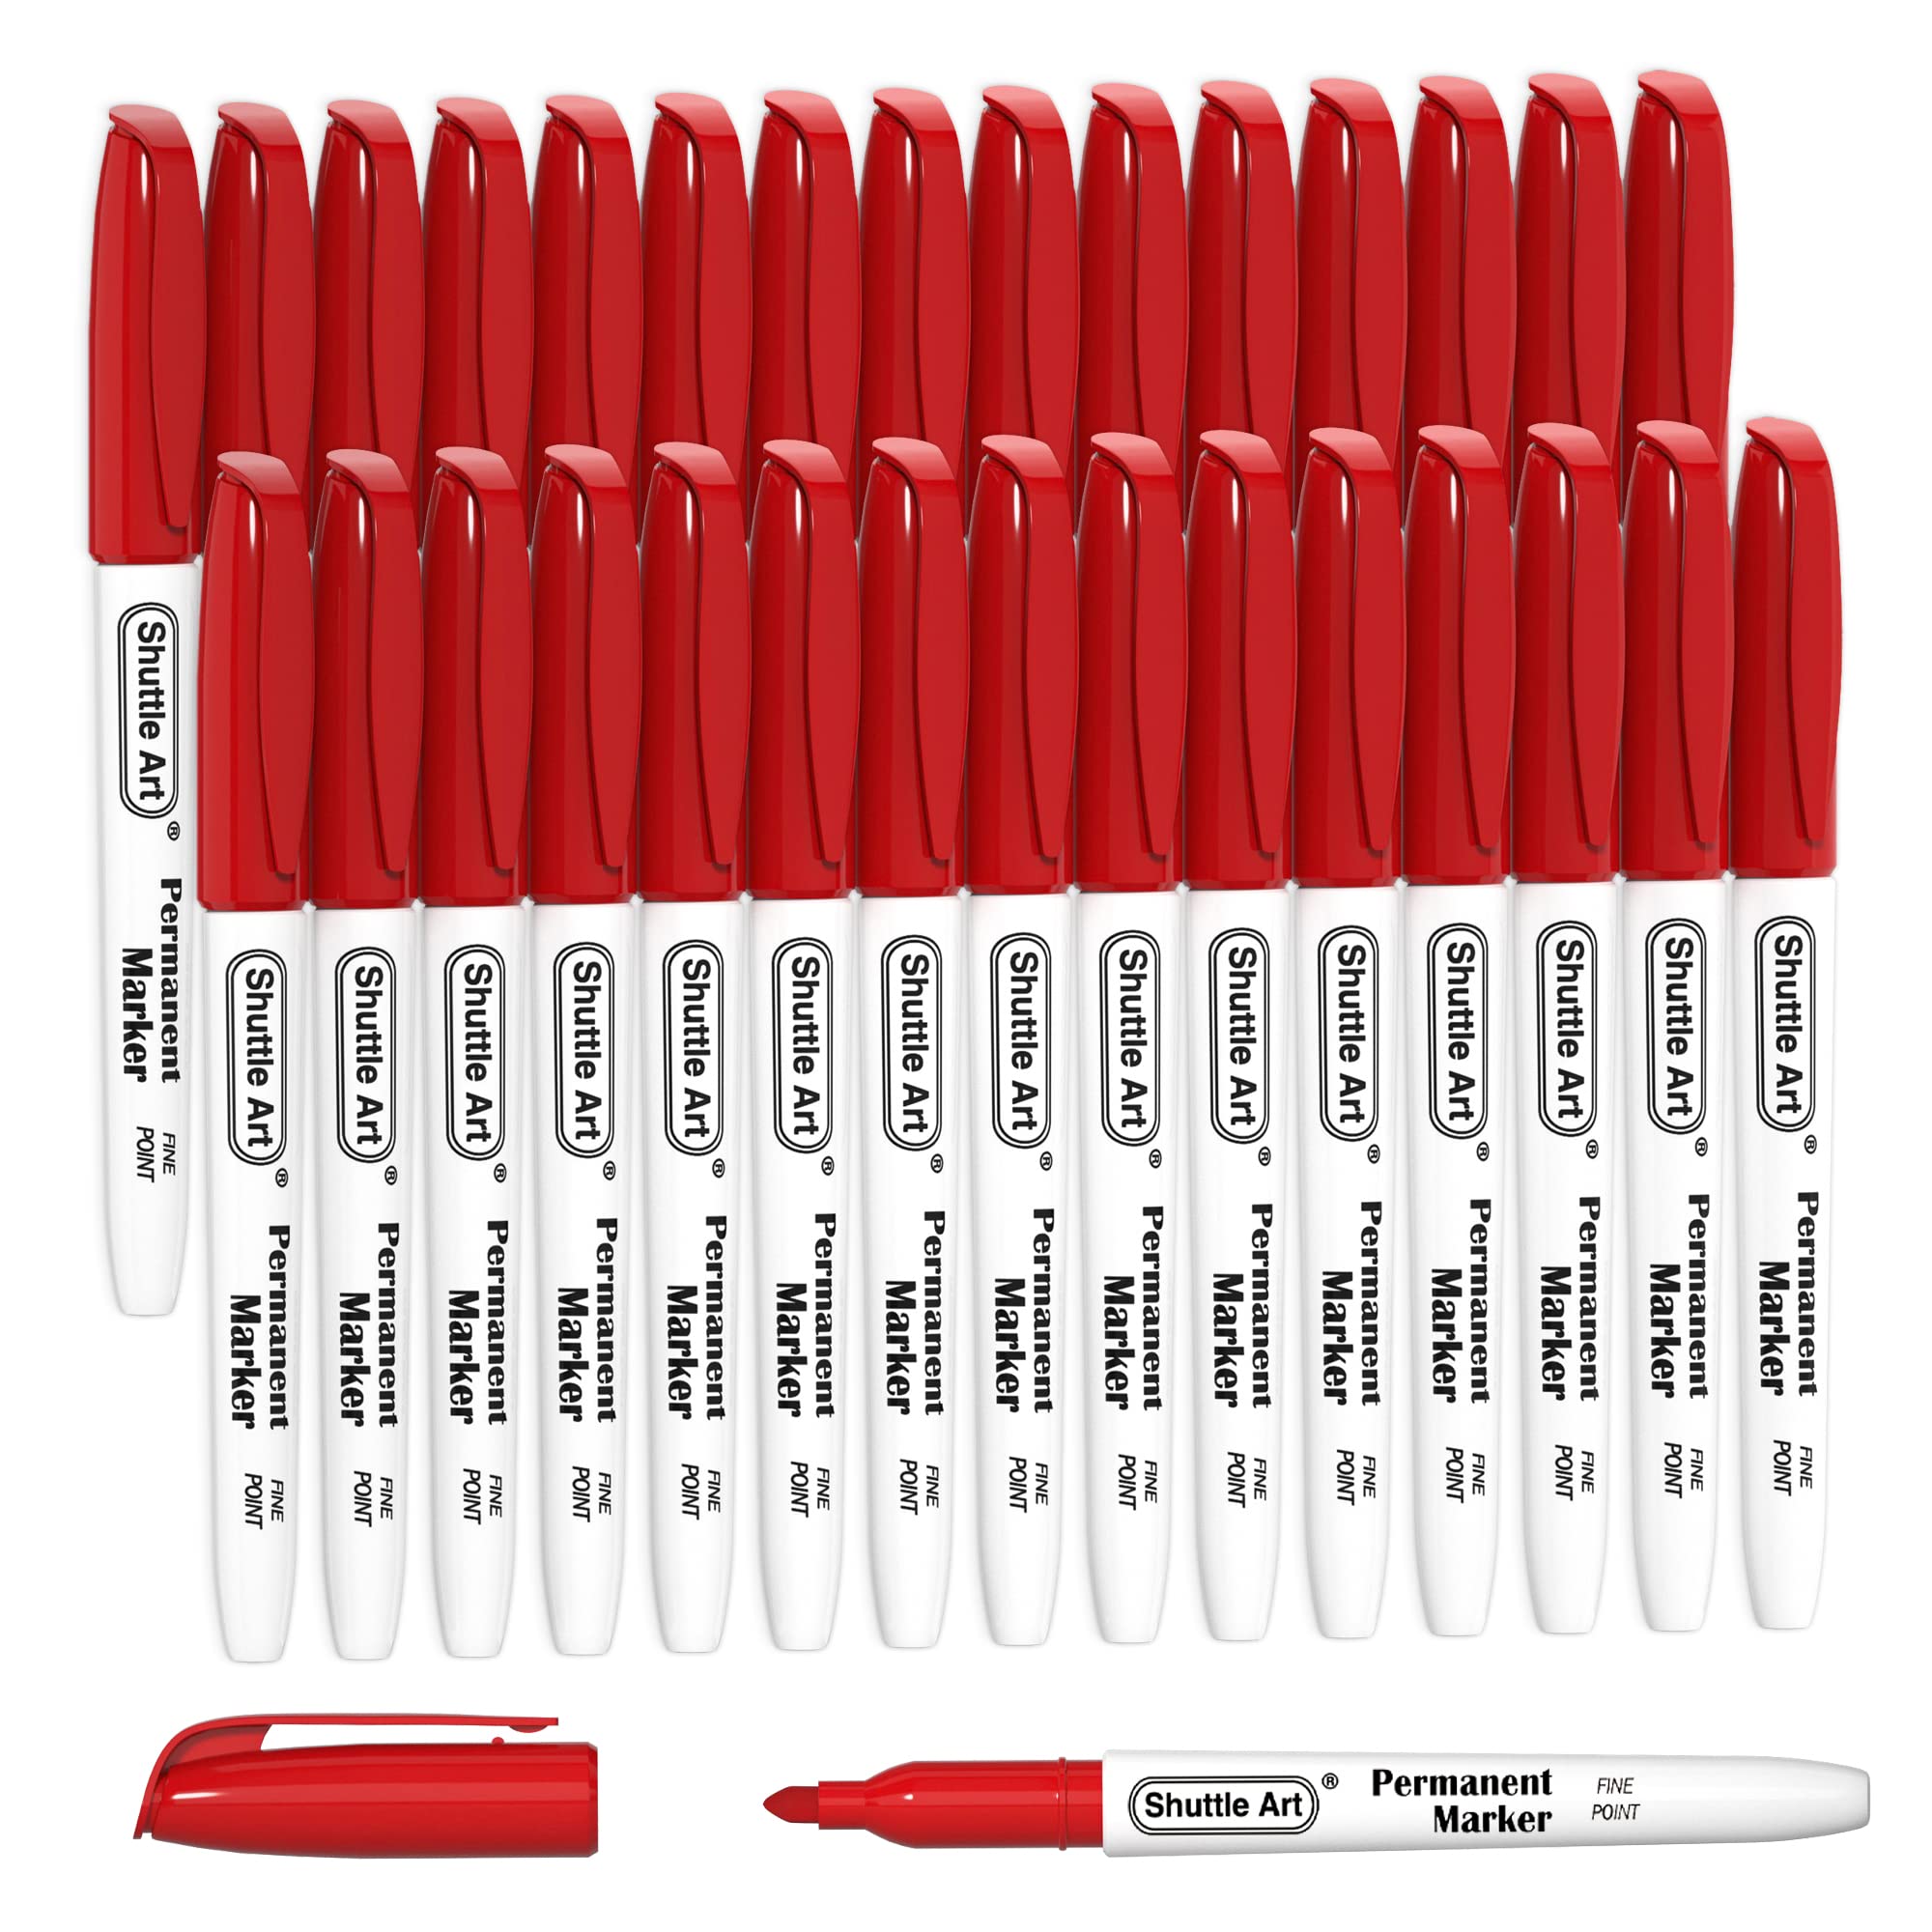 Shuttle Art Permanent Markers, 30 Pack Red Permanent Marker set,Fine Point, Works on Plastic,Wood,Stone,Metal and Glass for Dood